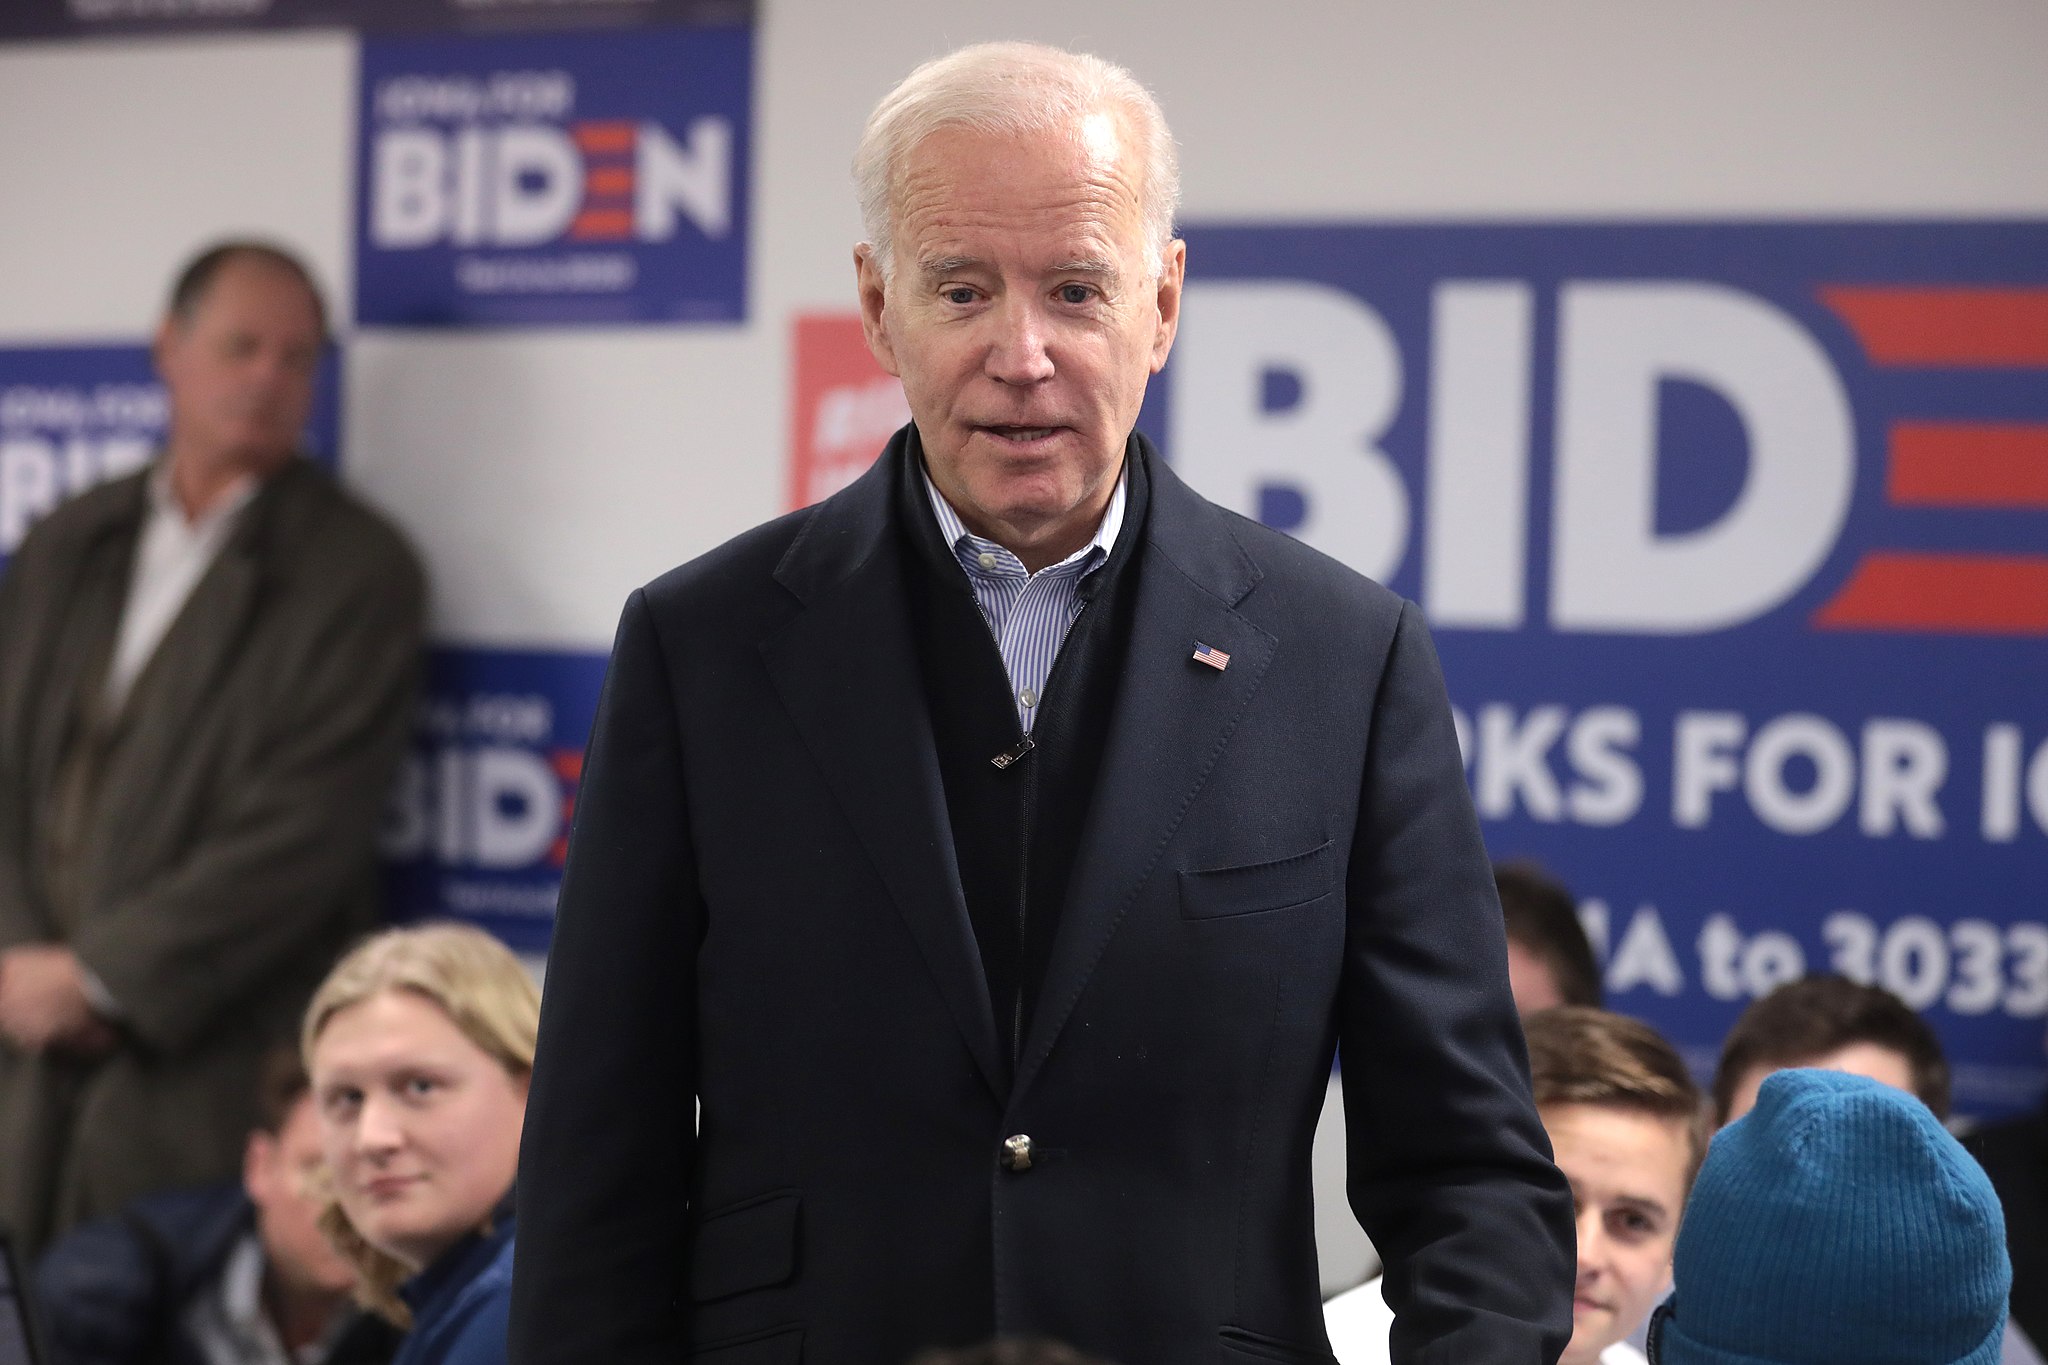 Has Biden’s Presidency Been A Plague On The United States?